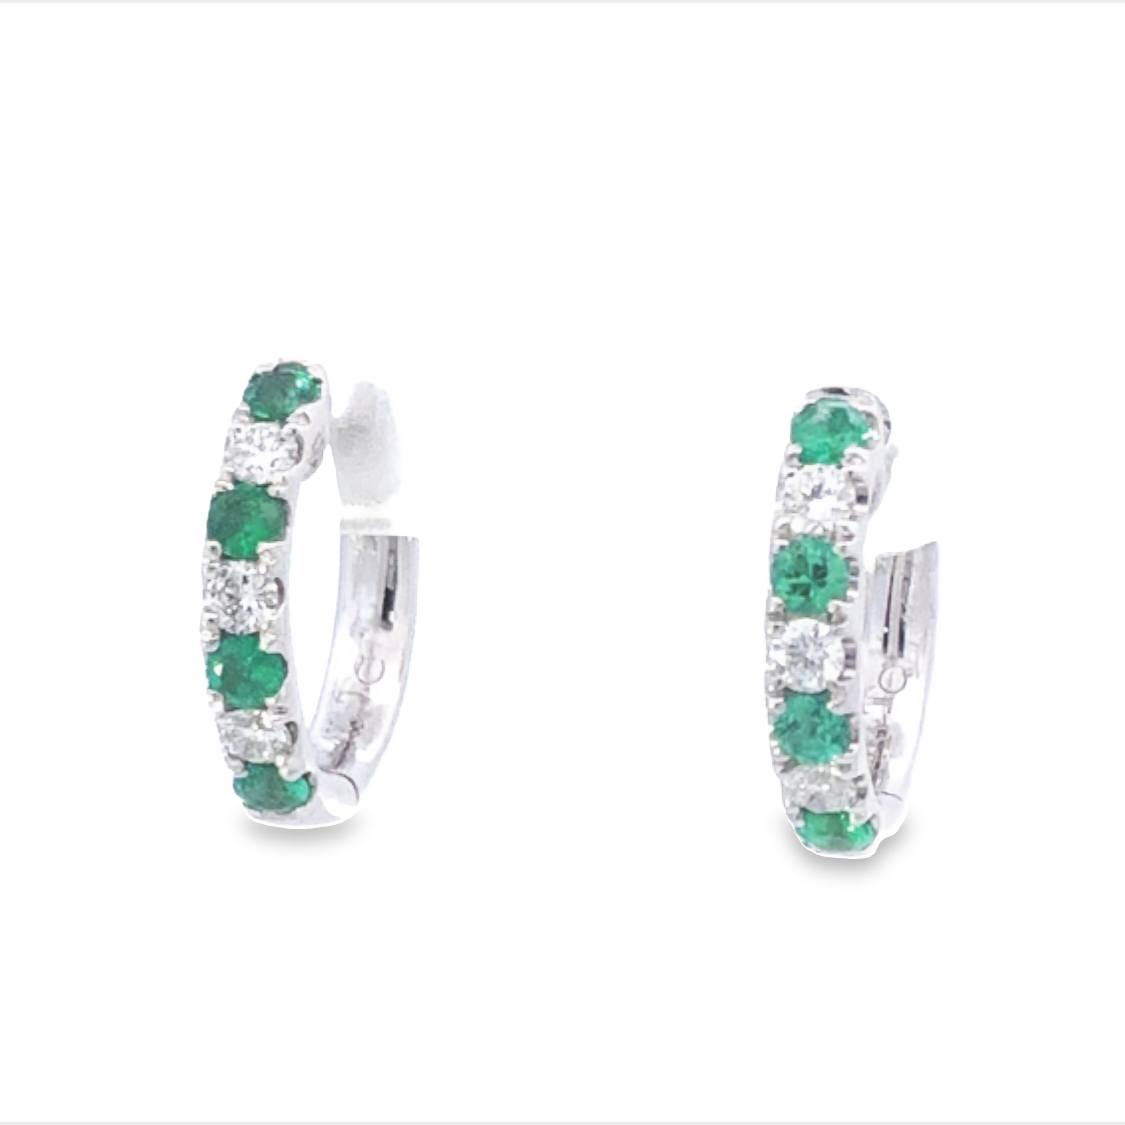 14K White Gold Hoop Earrings with 8 Round Emeralds 0.31 Tcw & 6 Round Diamonds 0.24 Tcw